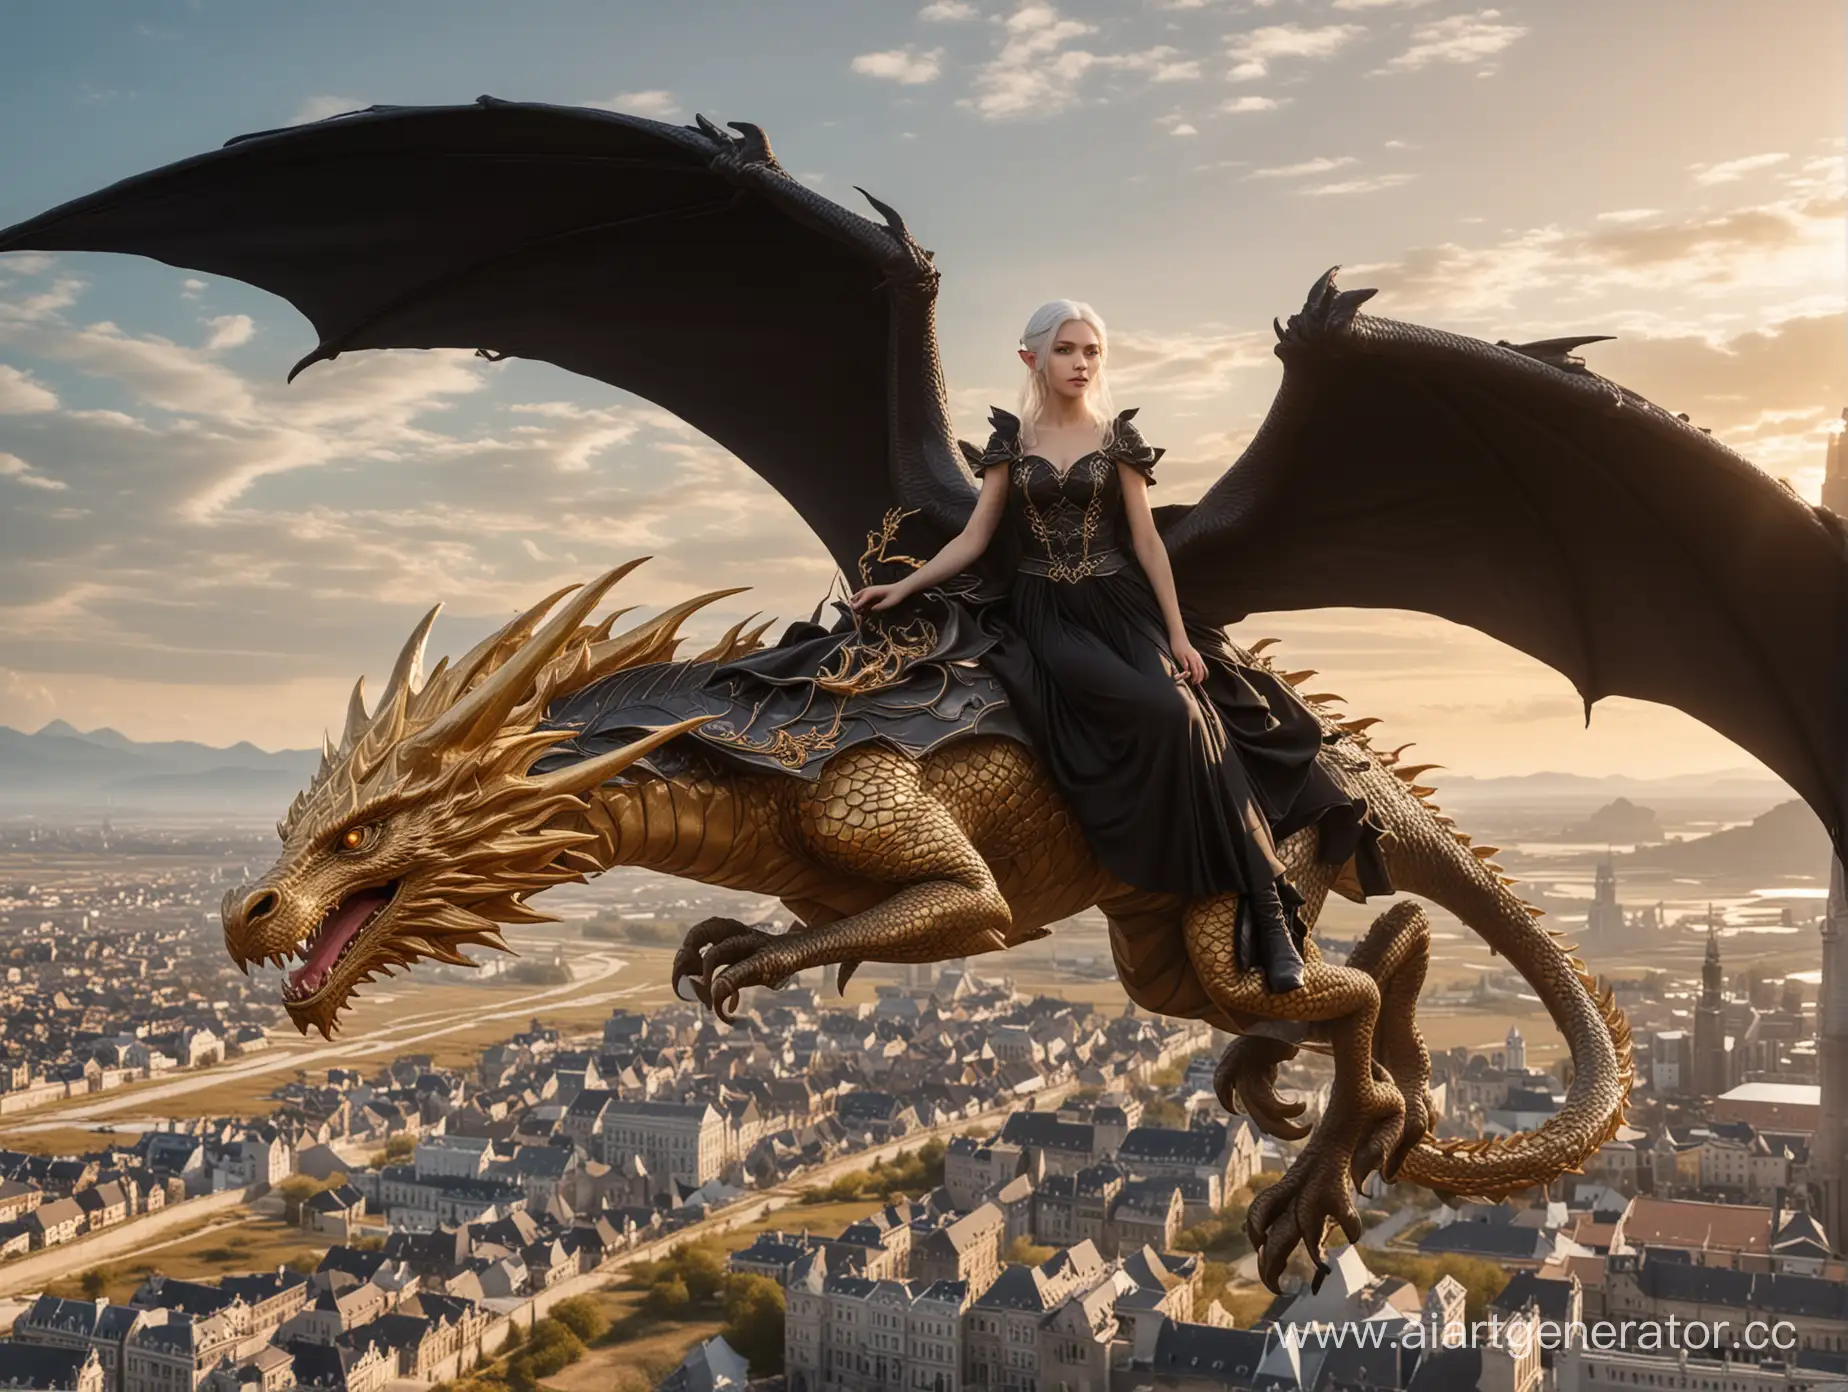 Majestic-WhiteHaired-Elf-Riding-Golden-Dragon-Over-City-and-Fields